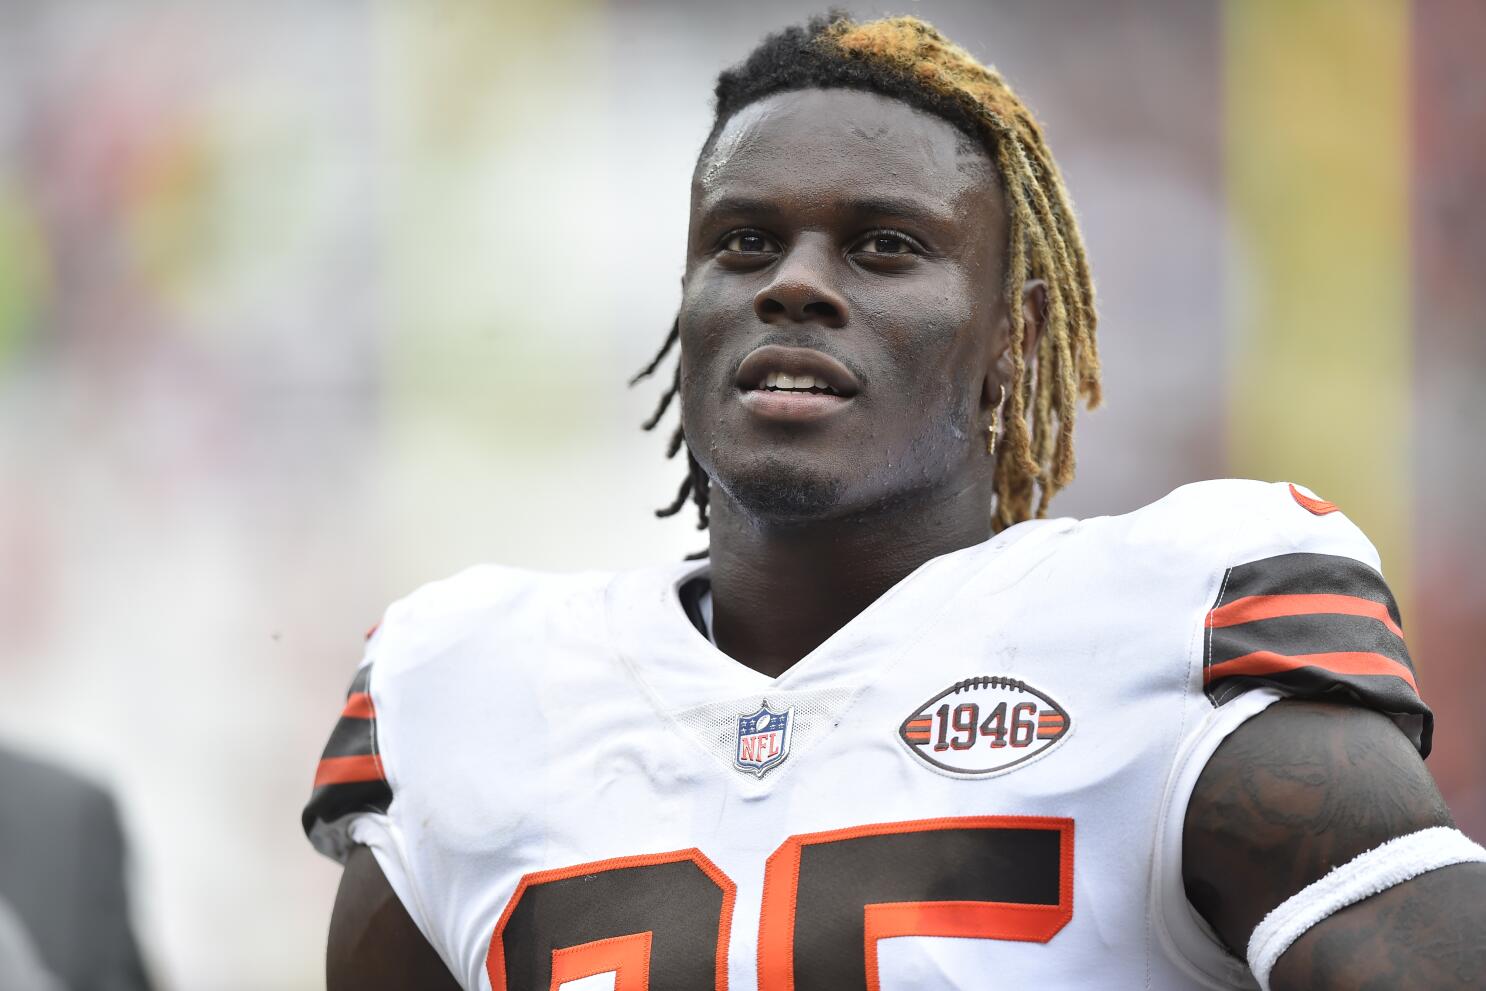 End game: Browns sign TE Njoku to 4-year contract extension - The